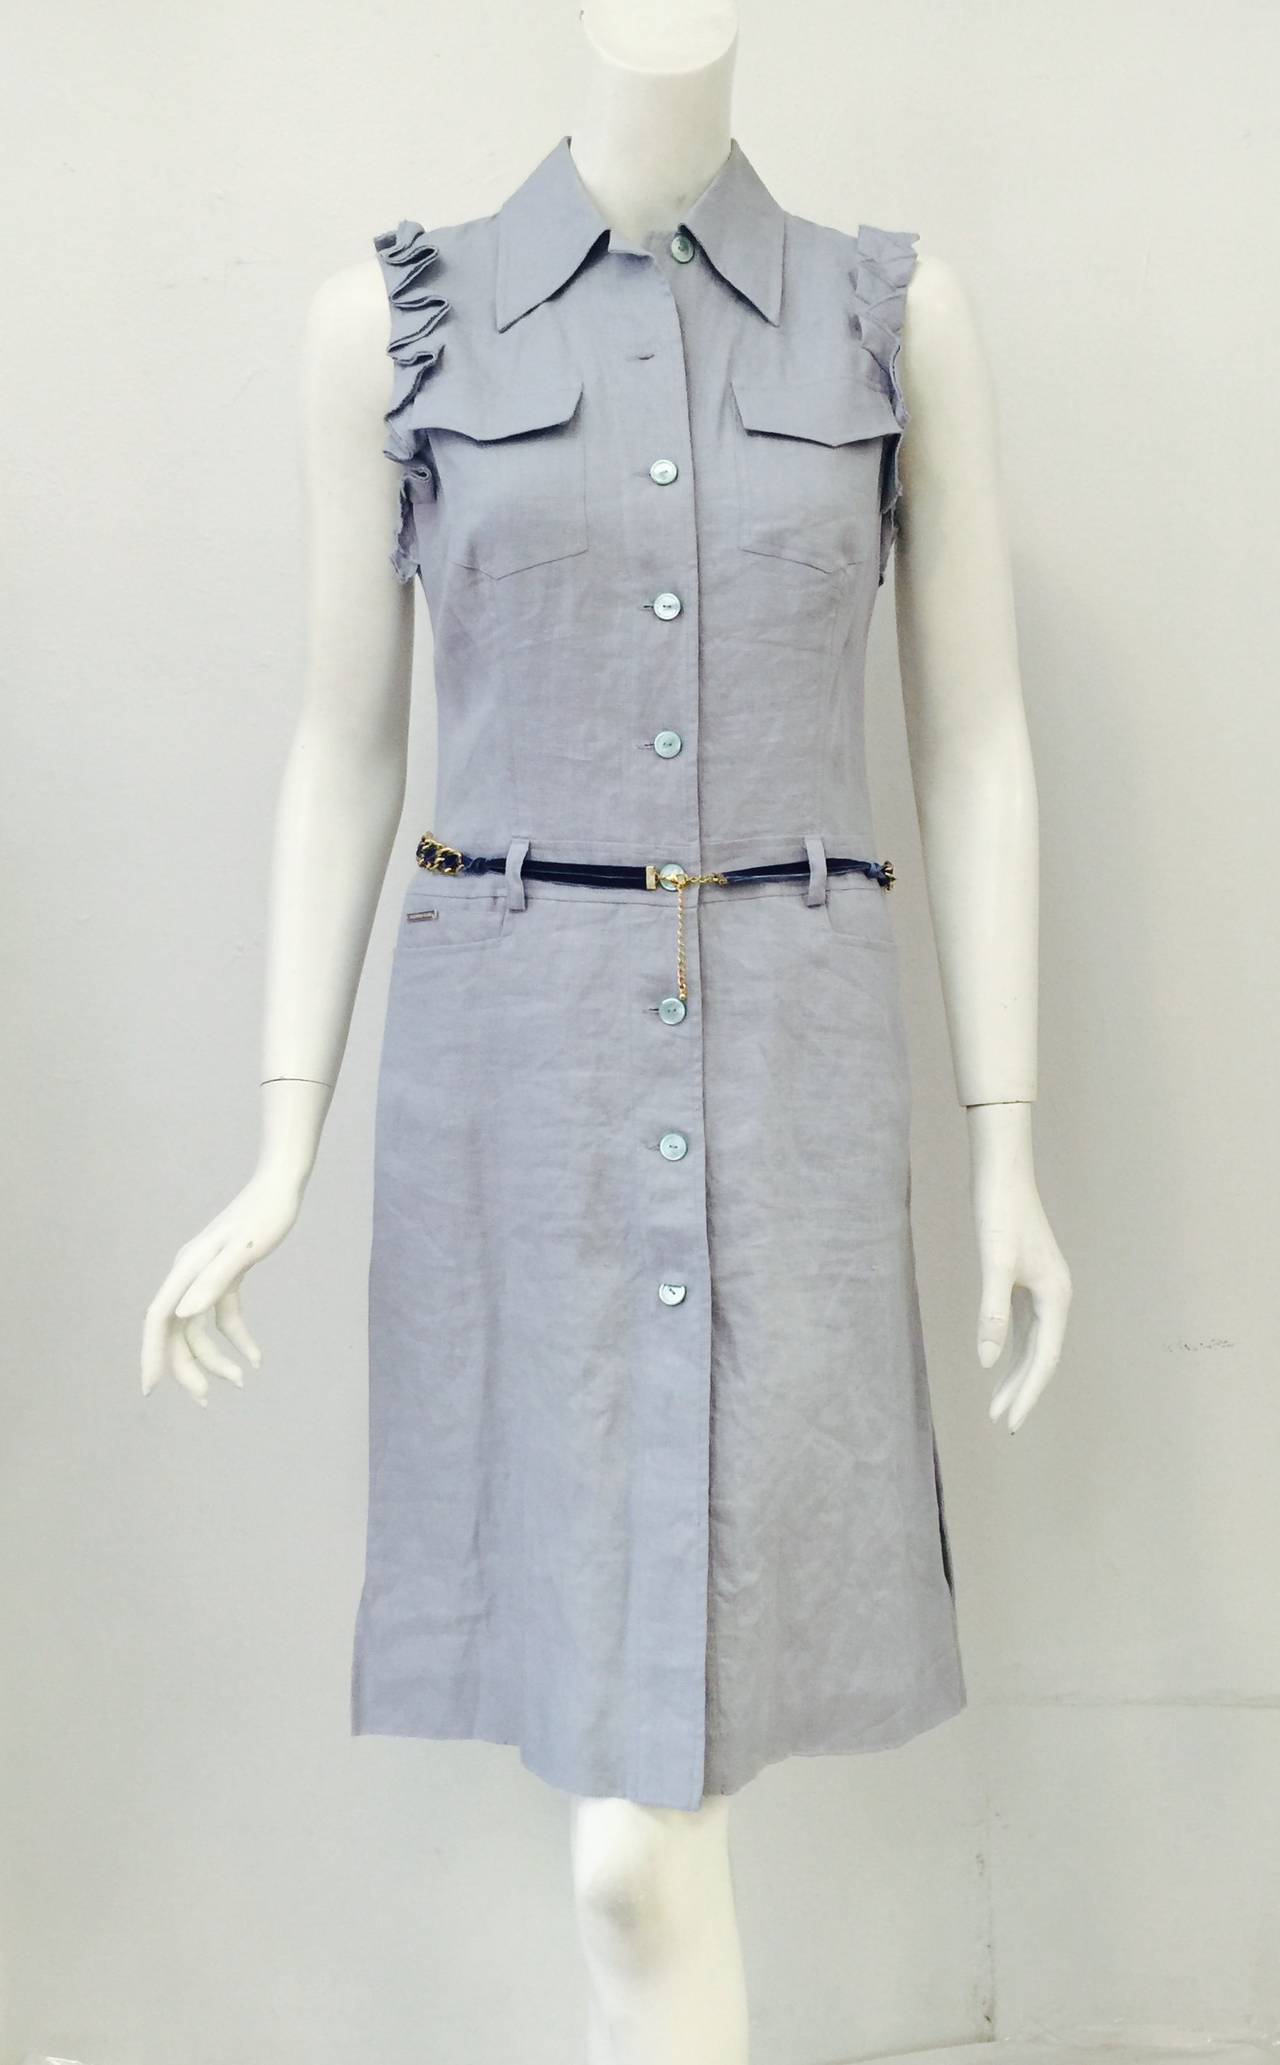 Valentino Jeans Sleeveless Powder Blue 100% Linen Day Dress In Excellent Condition For Sale In Palm Beach, FL